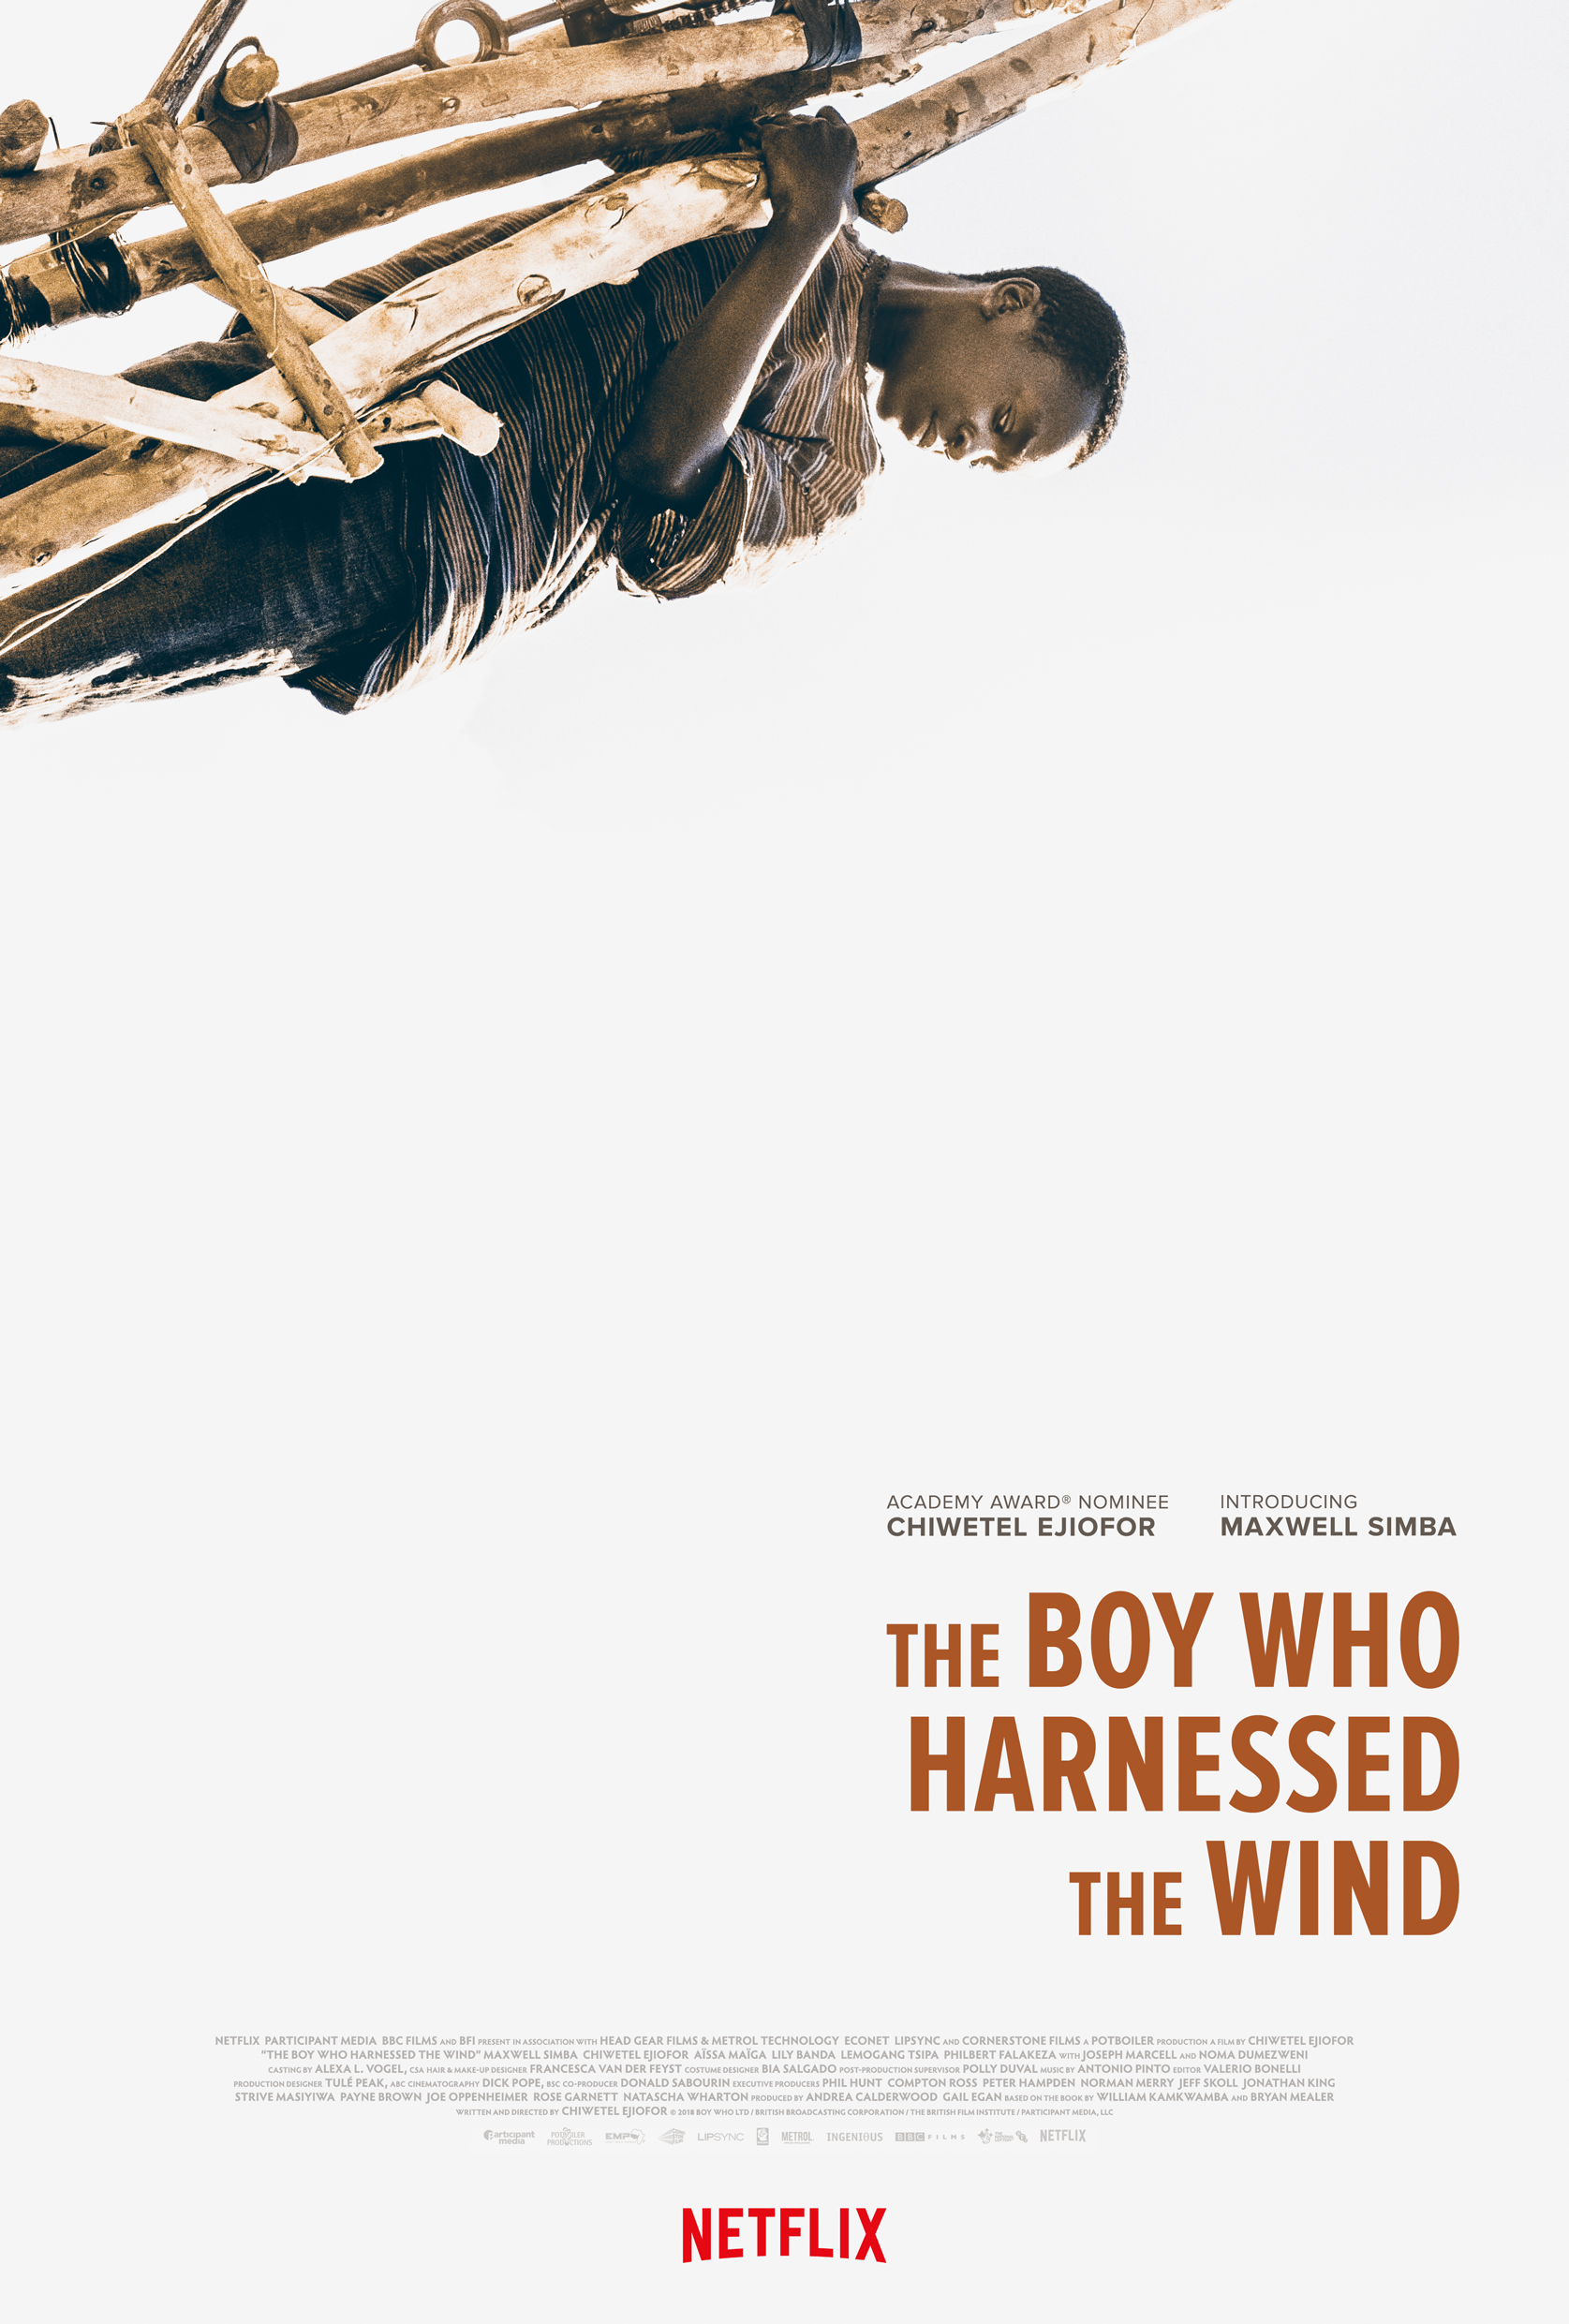 The Boy Who Harnessed The Wind Best Motivational Movies For Students